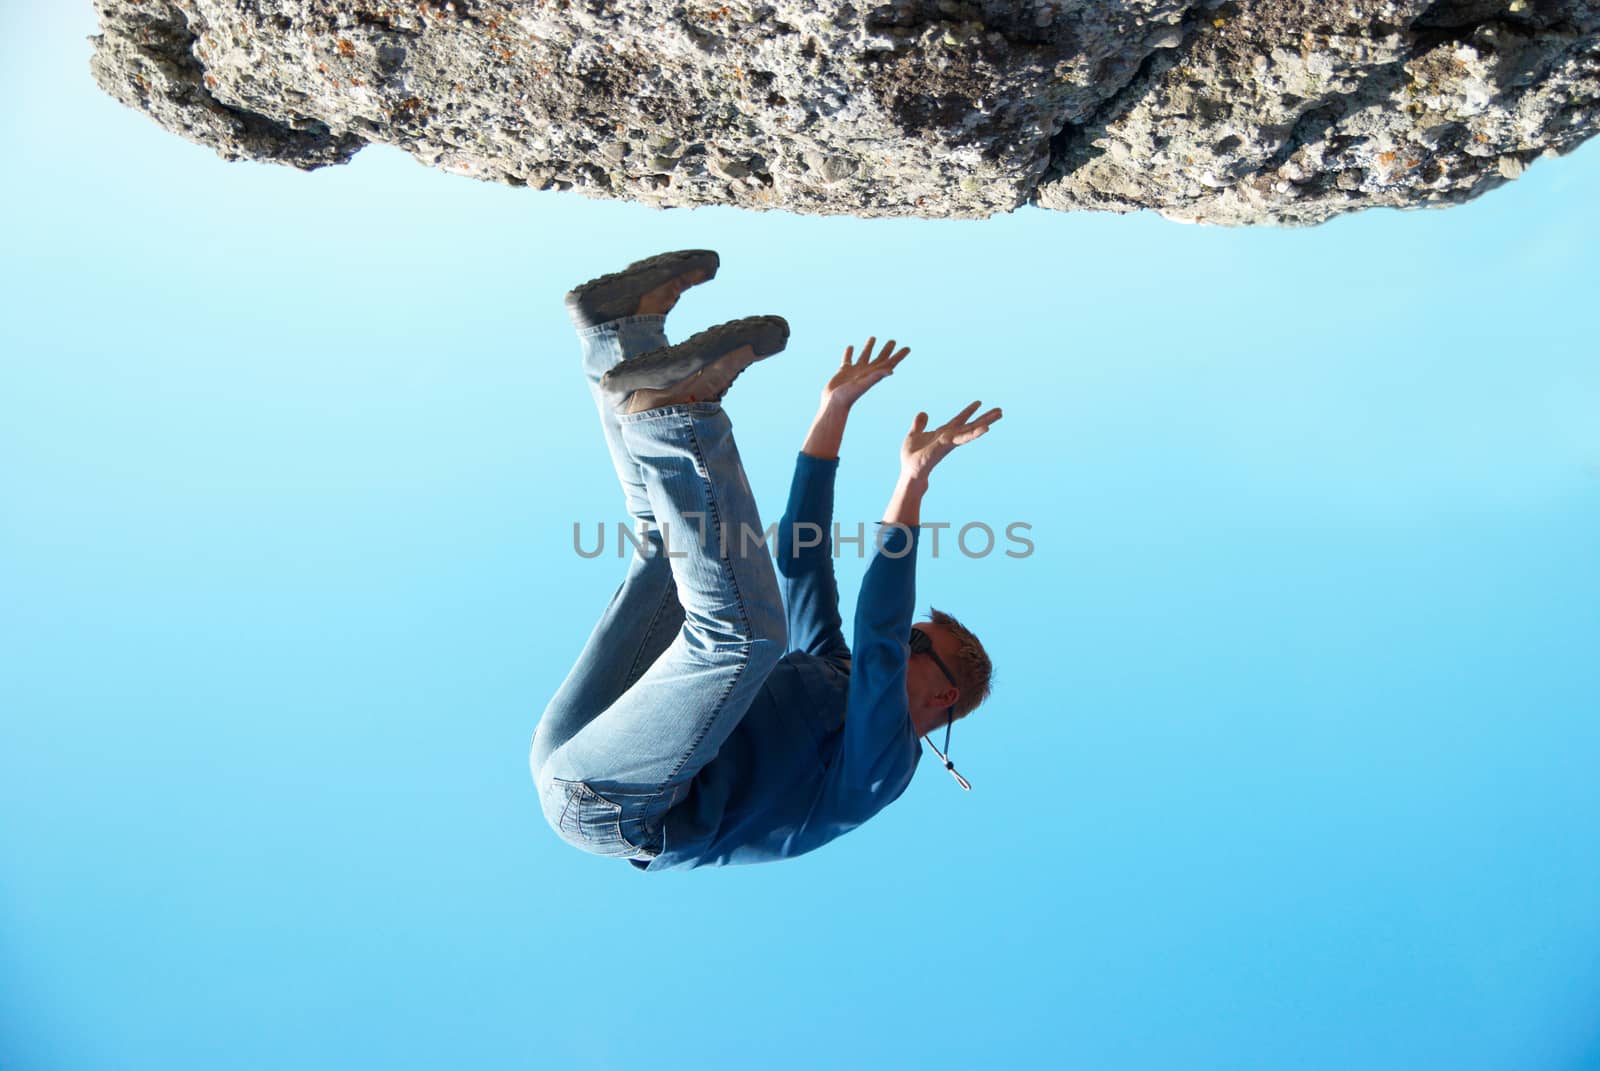 Falling down man from the rock with blue background